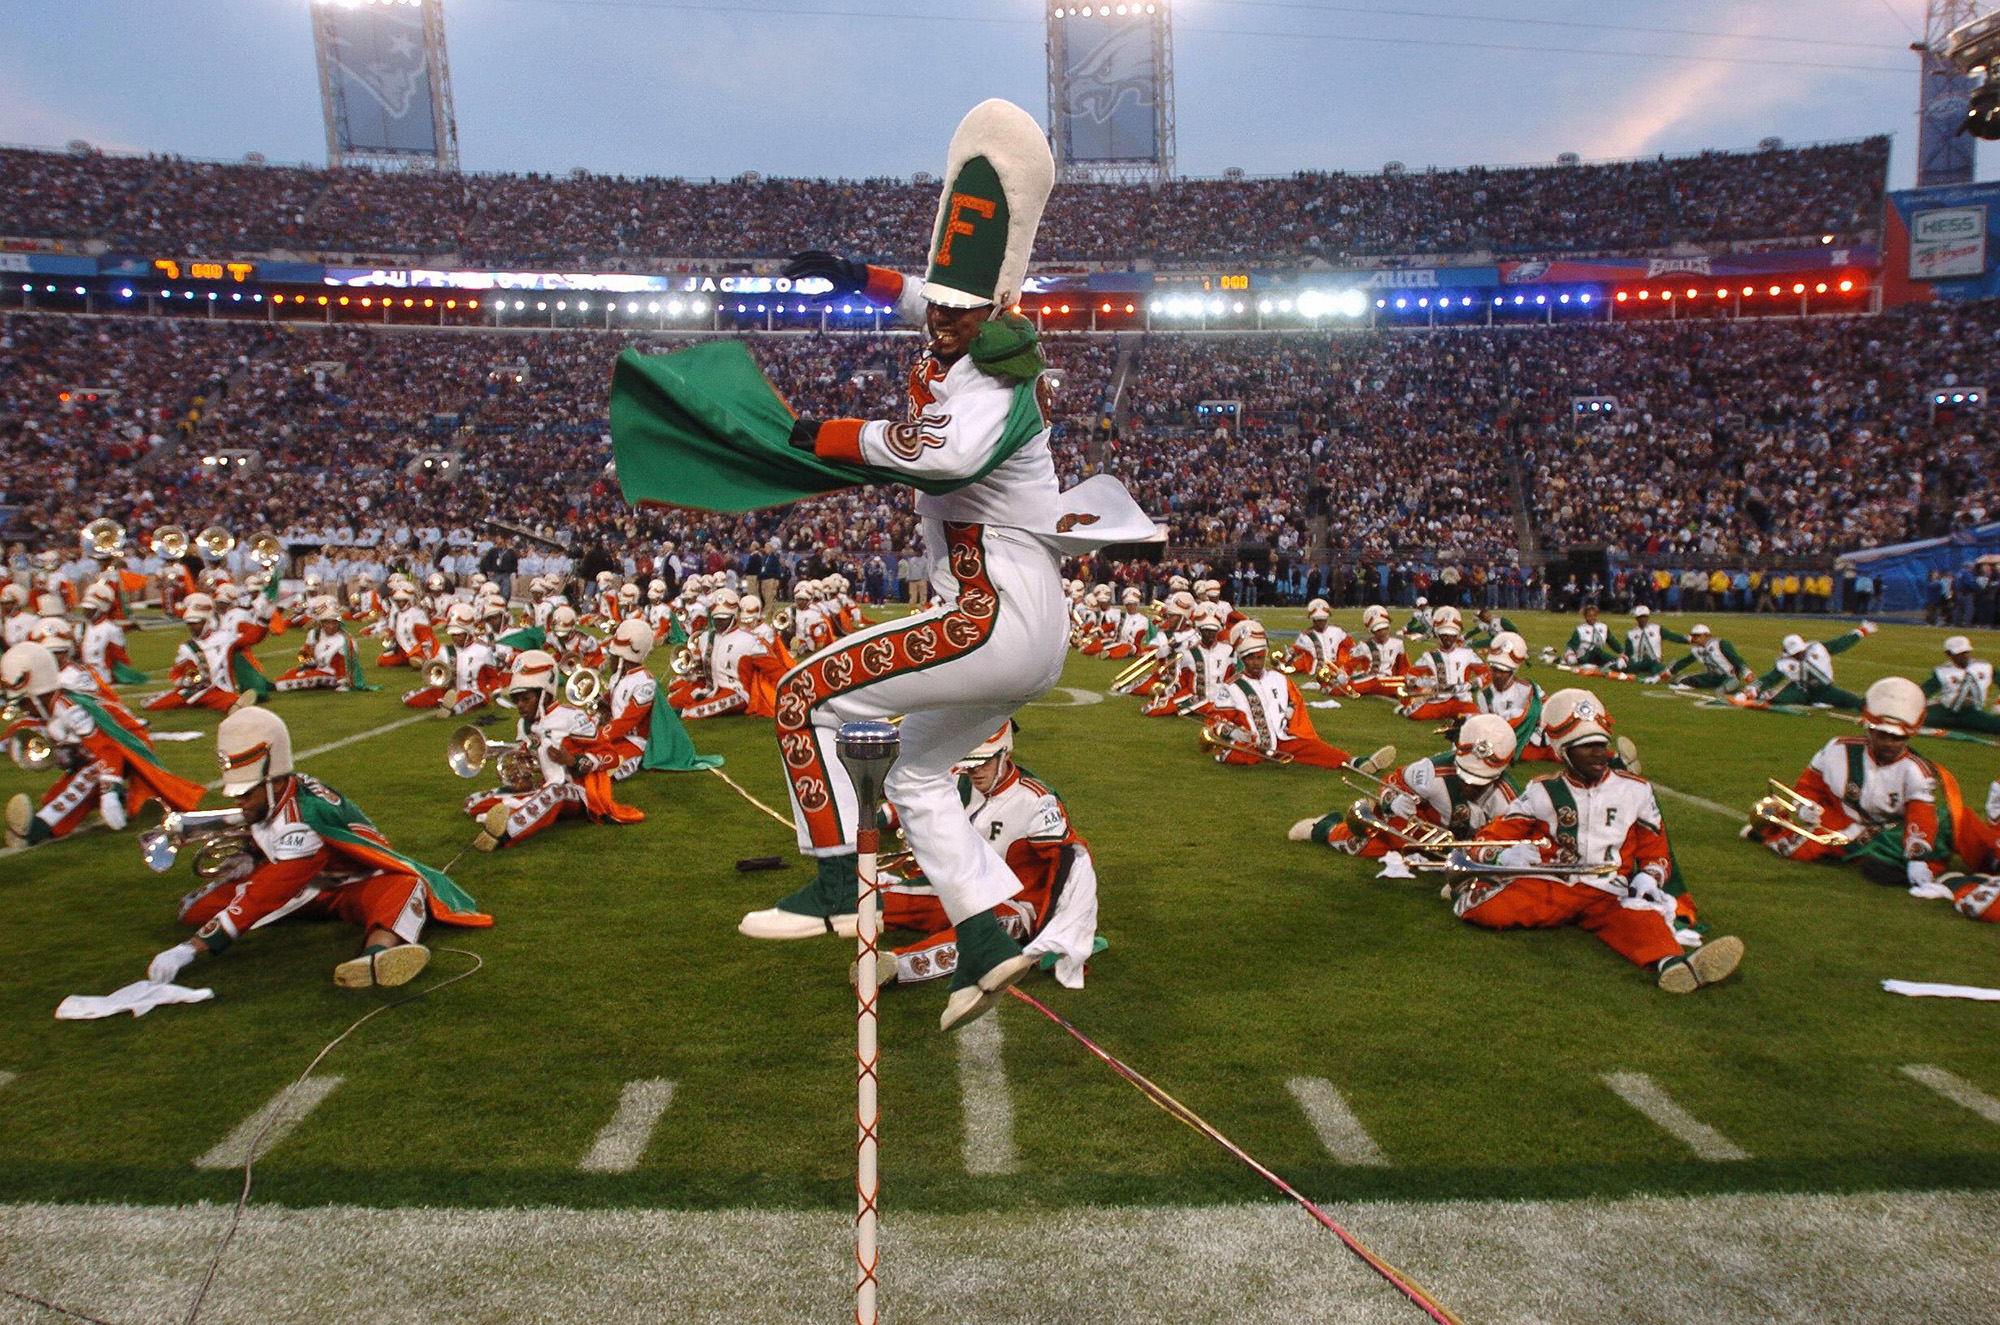 JACKSONVILLE, UNITED STATES:  Drum Major for Florida A&amp;M University marching band performs during the Super Bowl pre-game show 06 February 2005 at Alltel Stadium in Jacksonville.     AFP PHOTO/Roberto SCHMIDT  (Photo credit should read ROBERTO SCHMIDT/AFP/Getty Images) (ROBERTO SCHMIDT&mdash;AFP/Getty Images)